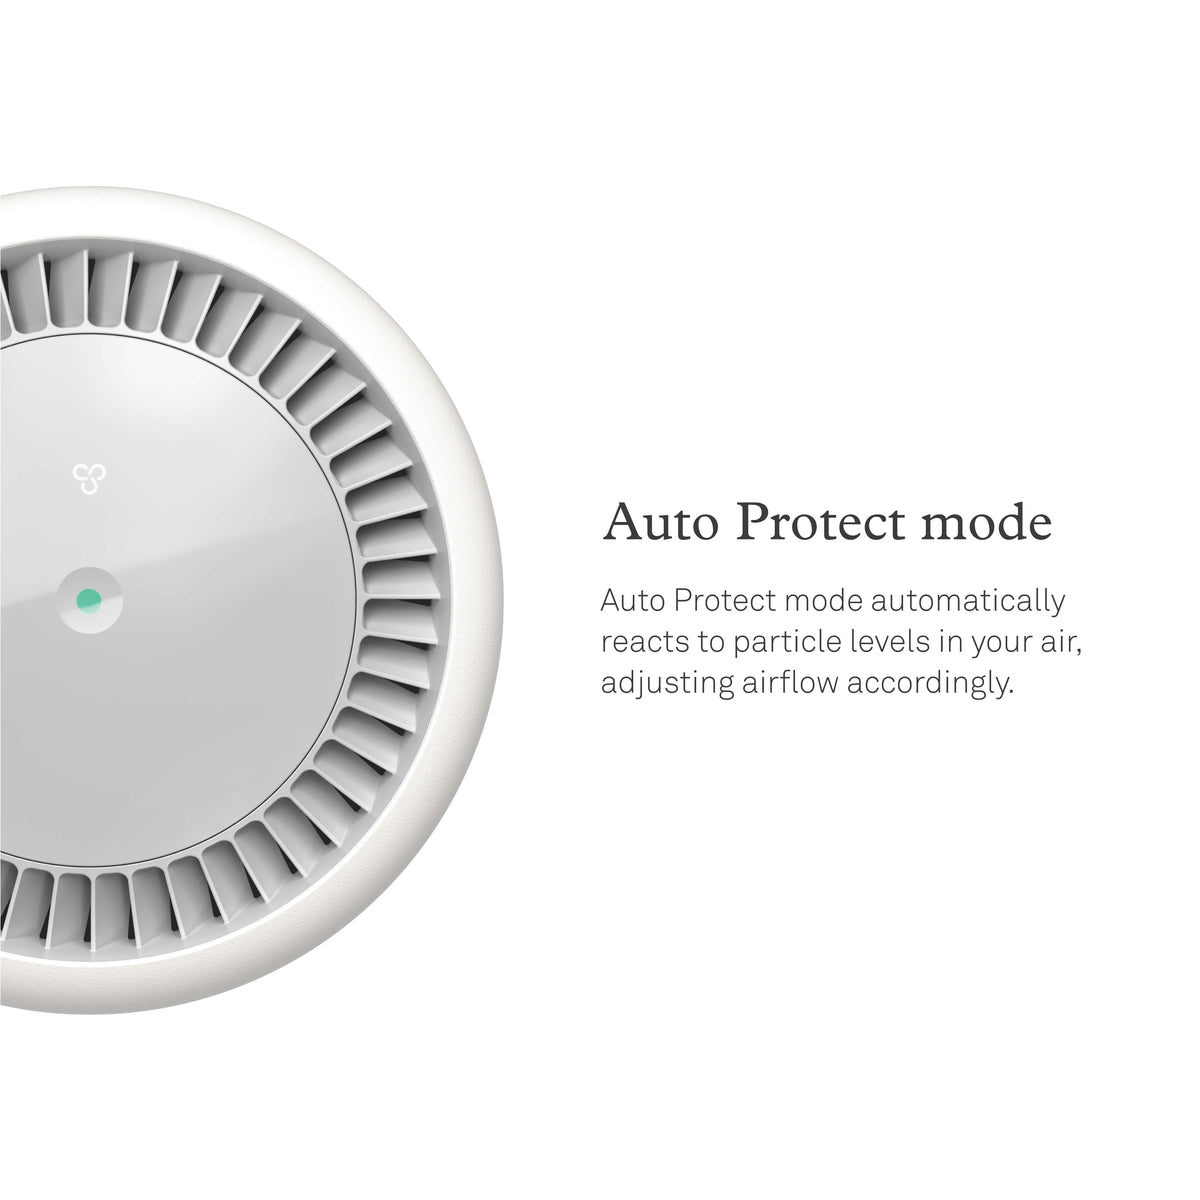 Air Mini+ button with color-coded air quality display. Auto Protect mode automatically reacts to particle levels in your air, adjusting airflow accordingly.